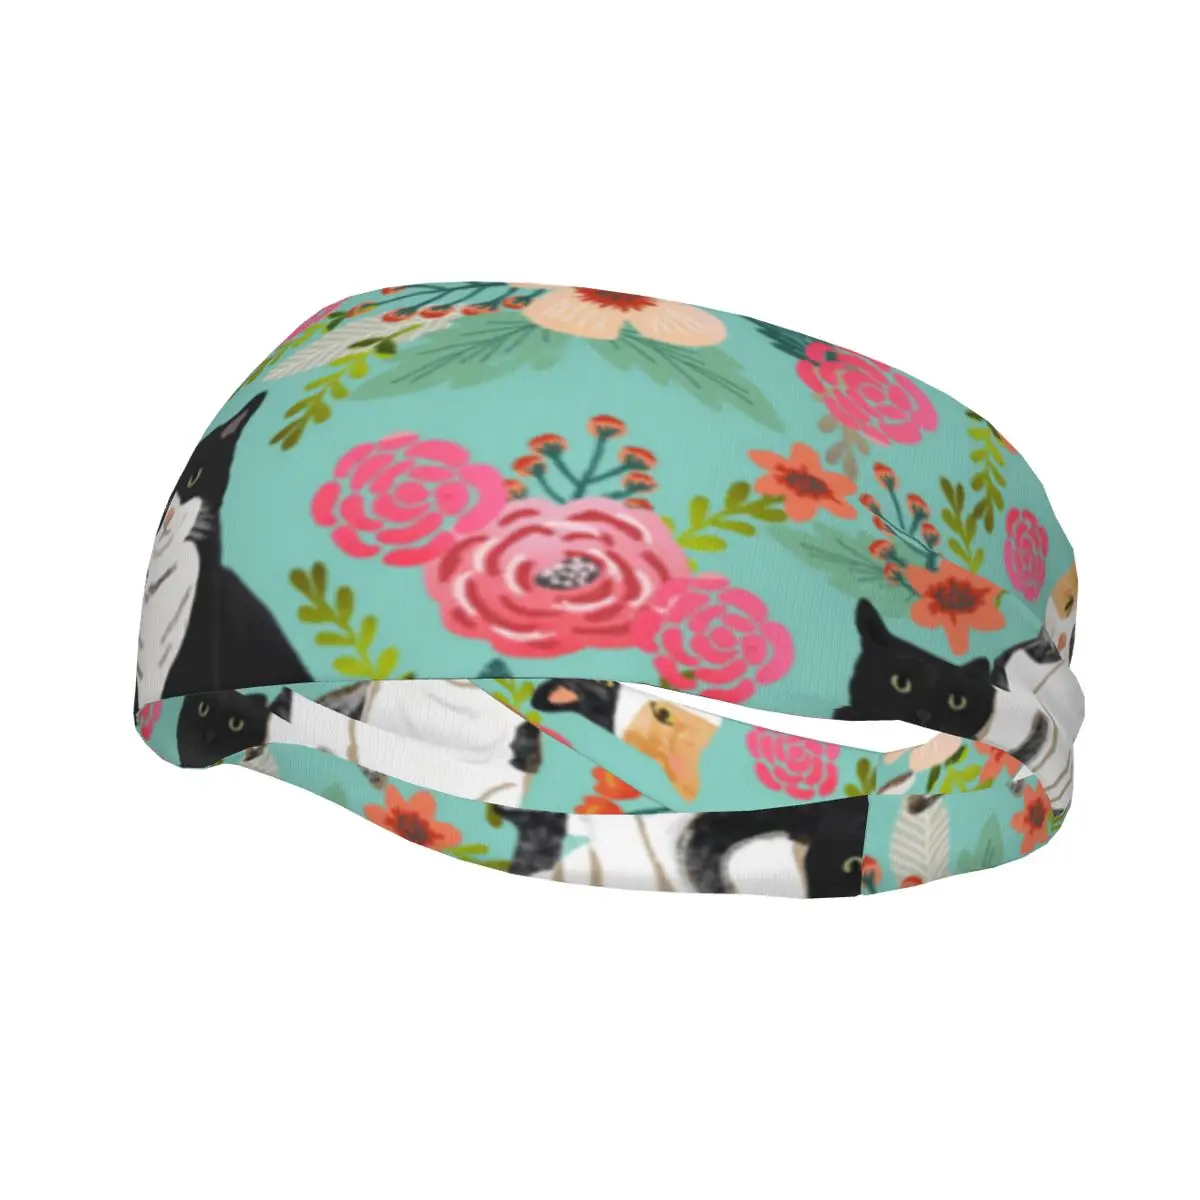 

Cats Vintage Florals Sweat Headband Animal Hair Bands Yoga Running Sweatband Sports Safety for Women Men